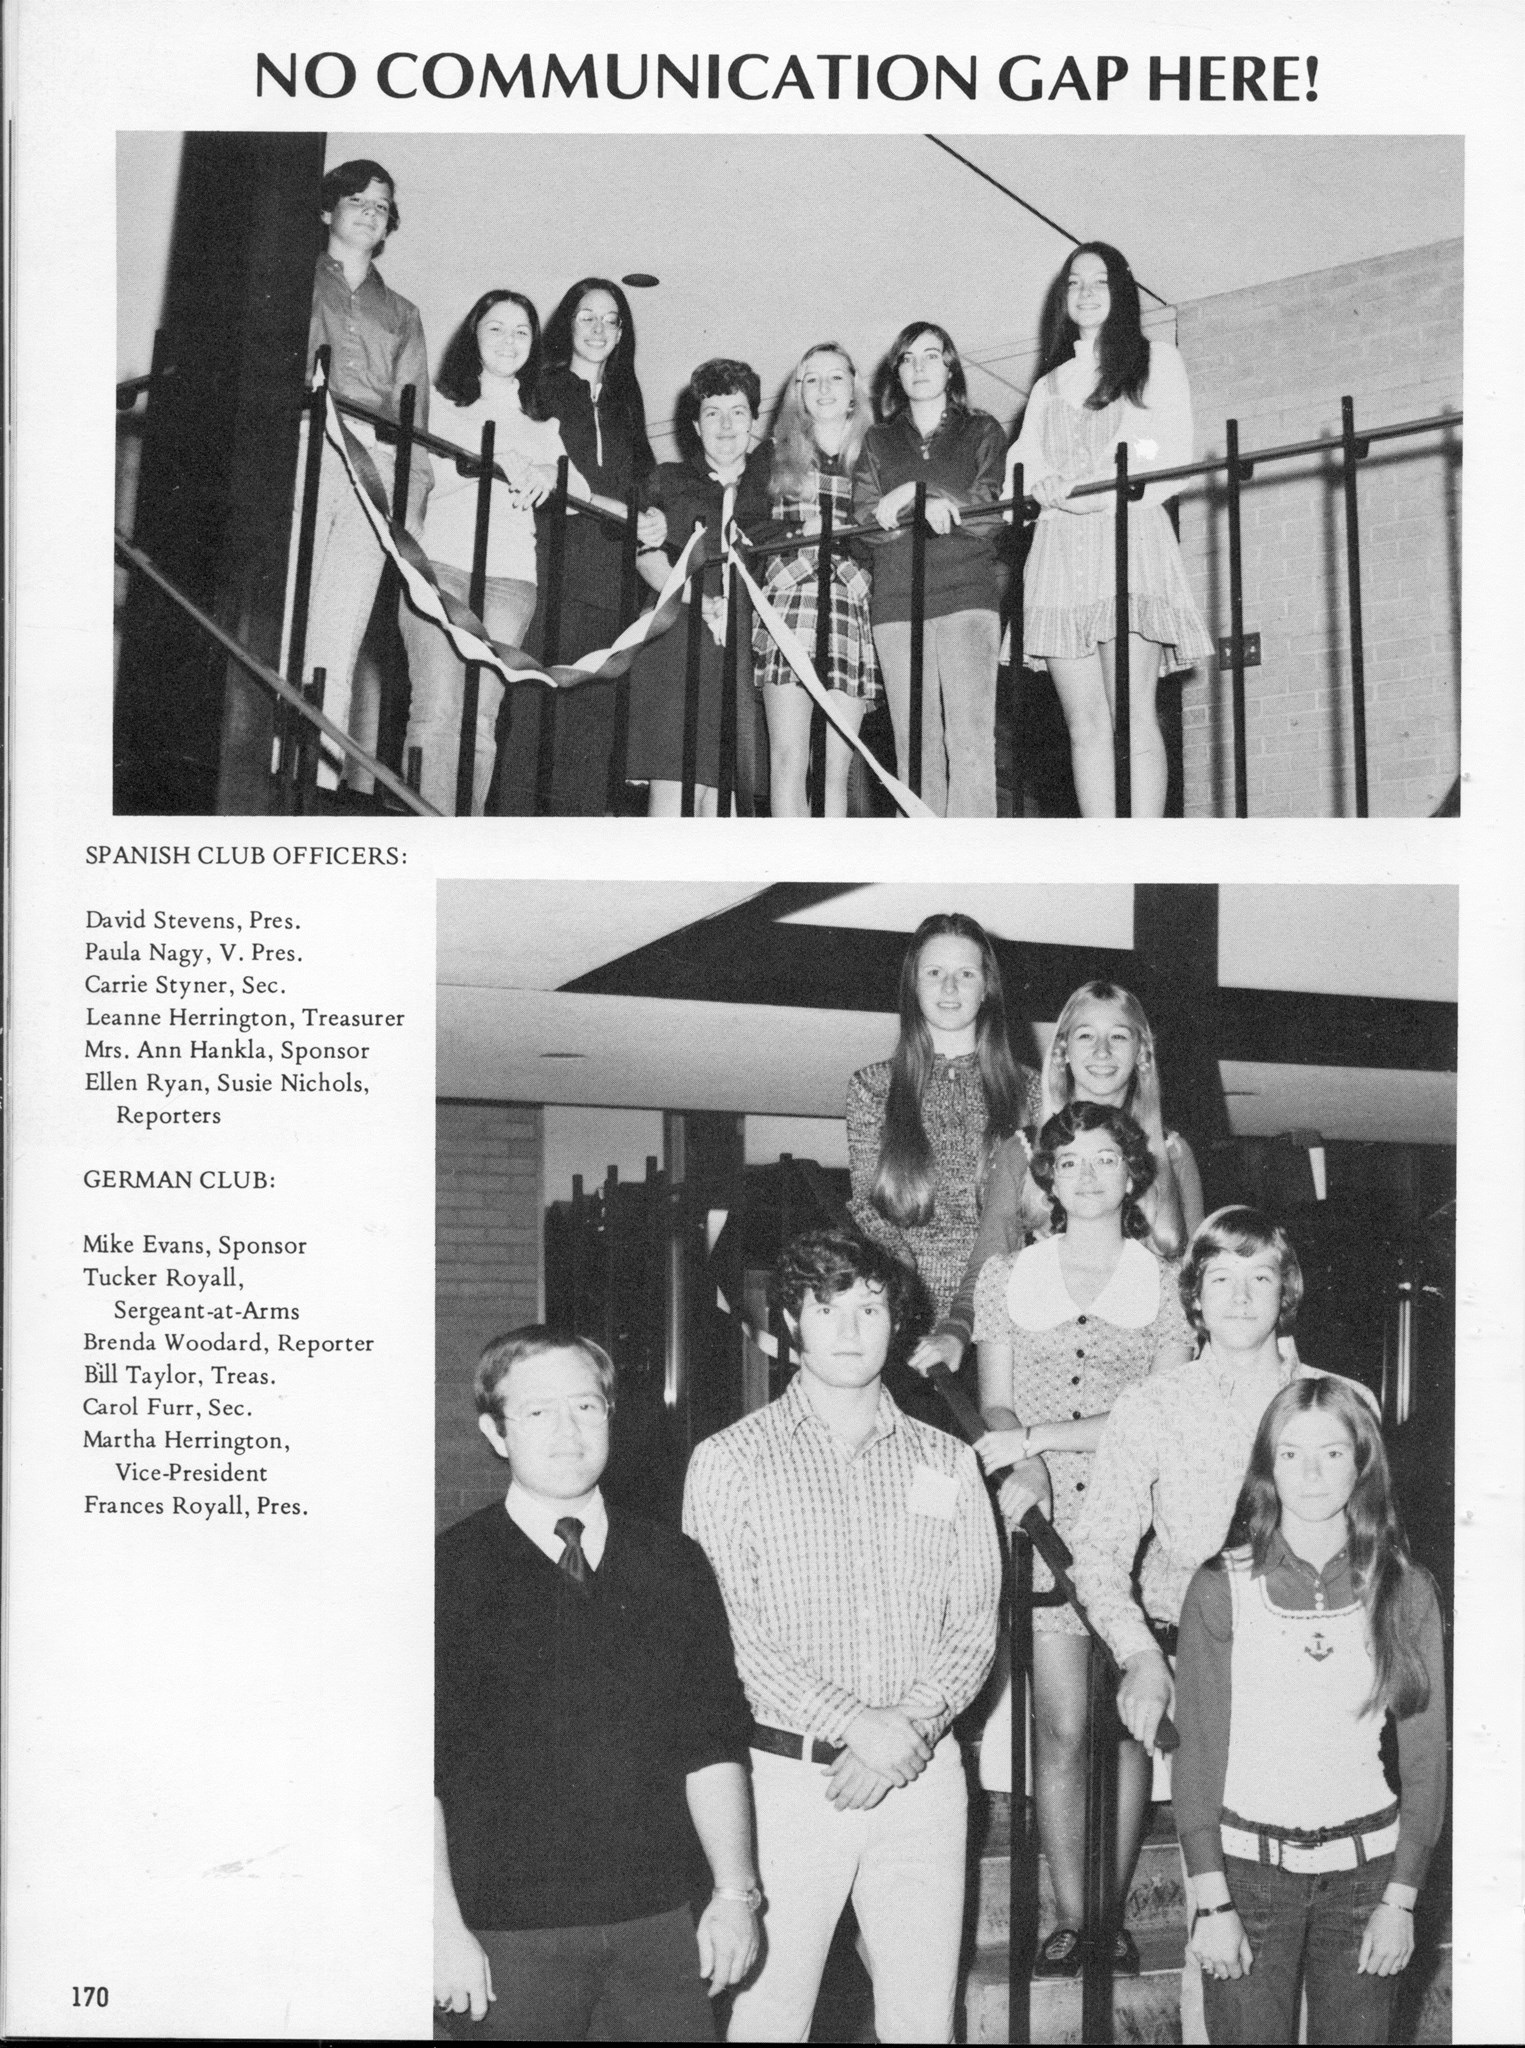 ../../../Images/Large/1973/Arclight-1973-pg0170.jpg